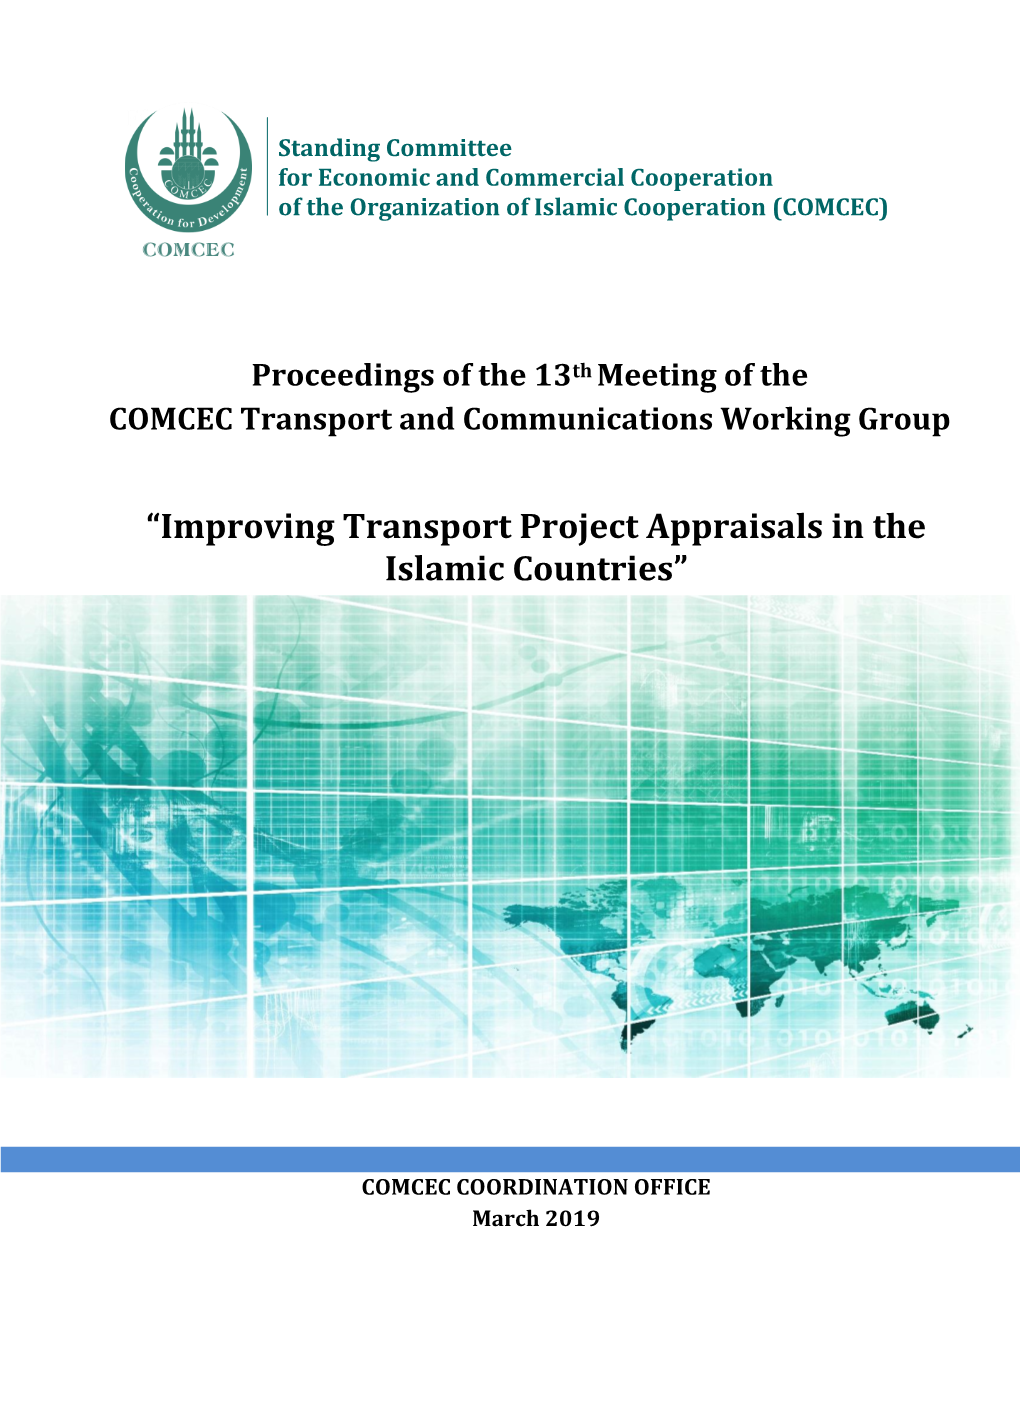 “Improving Transport Project Appraisals in the Islamic Countries”